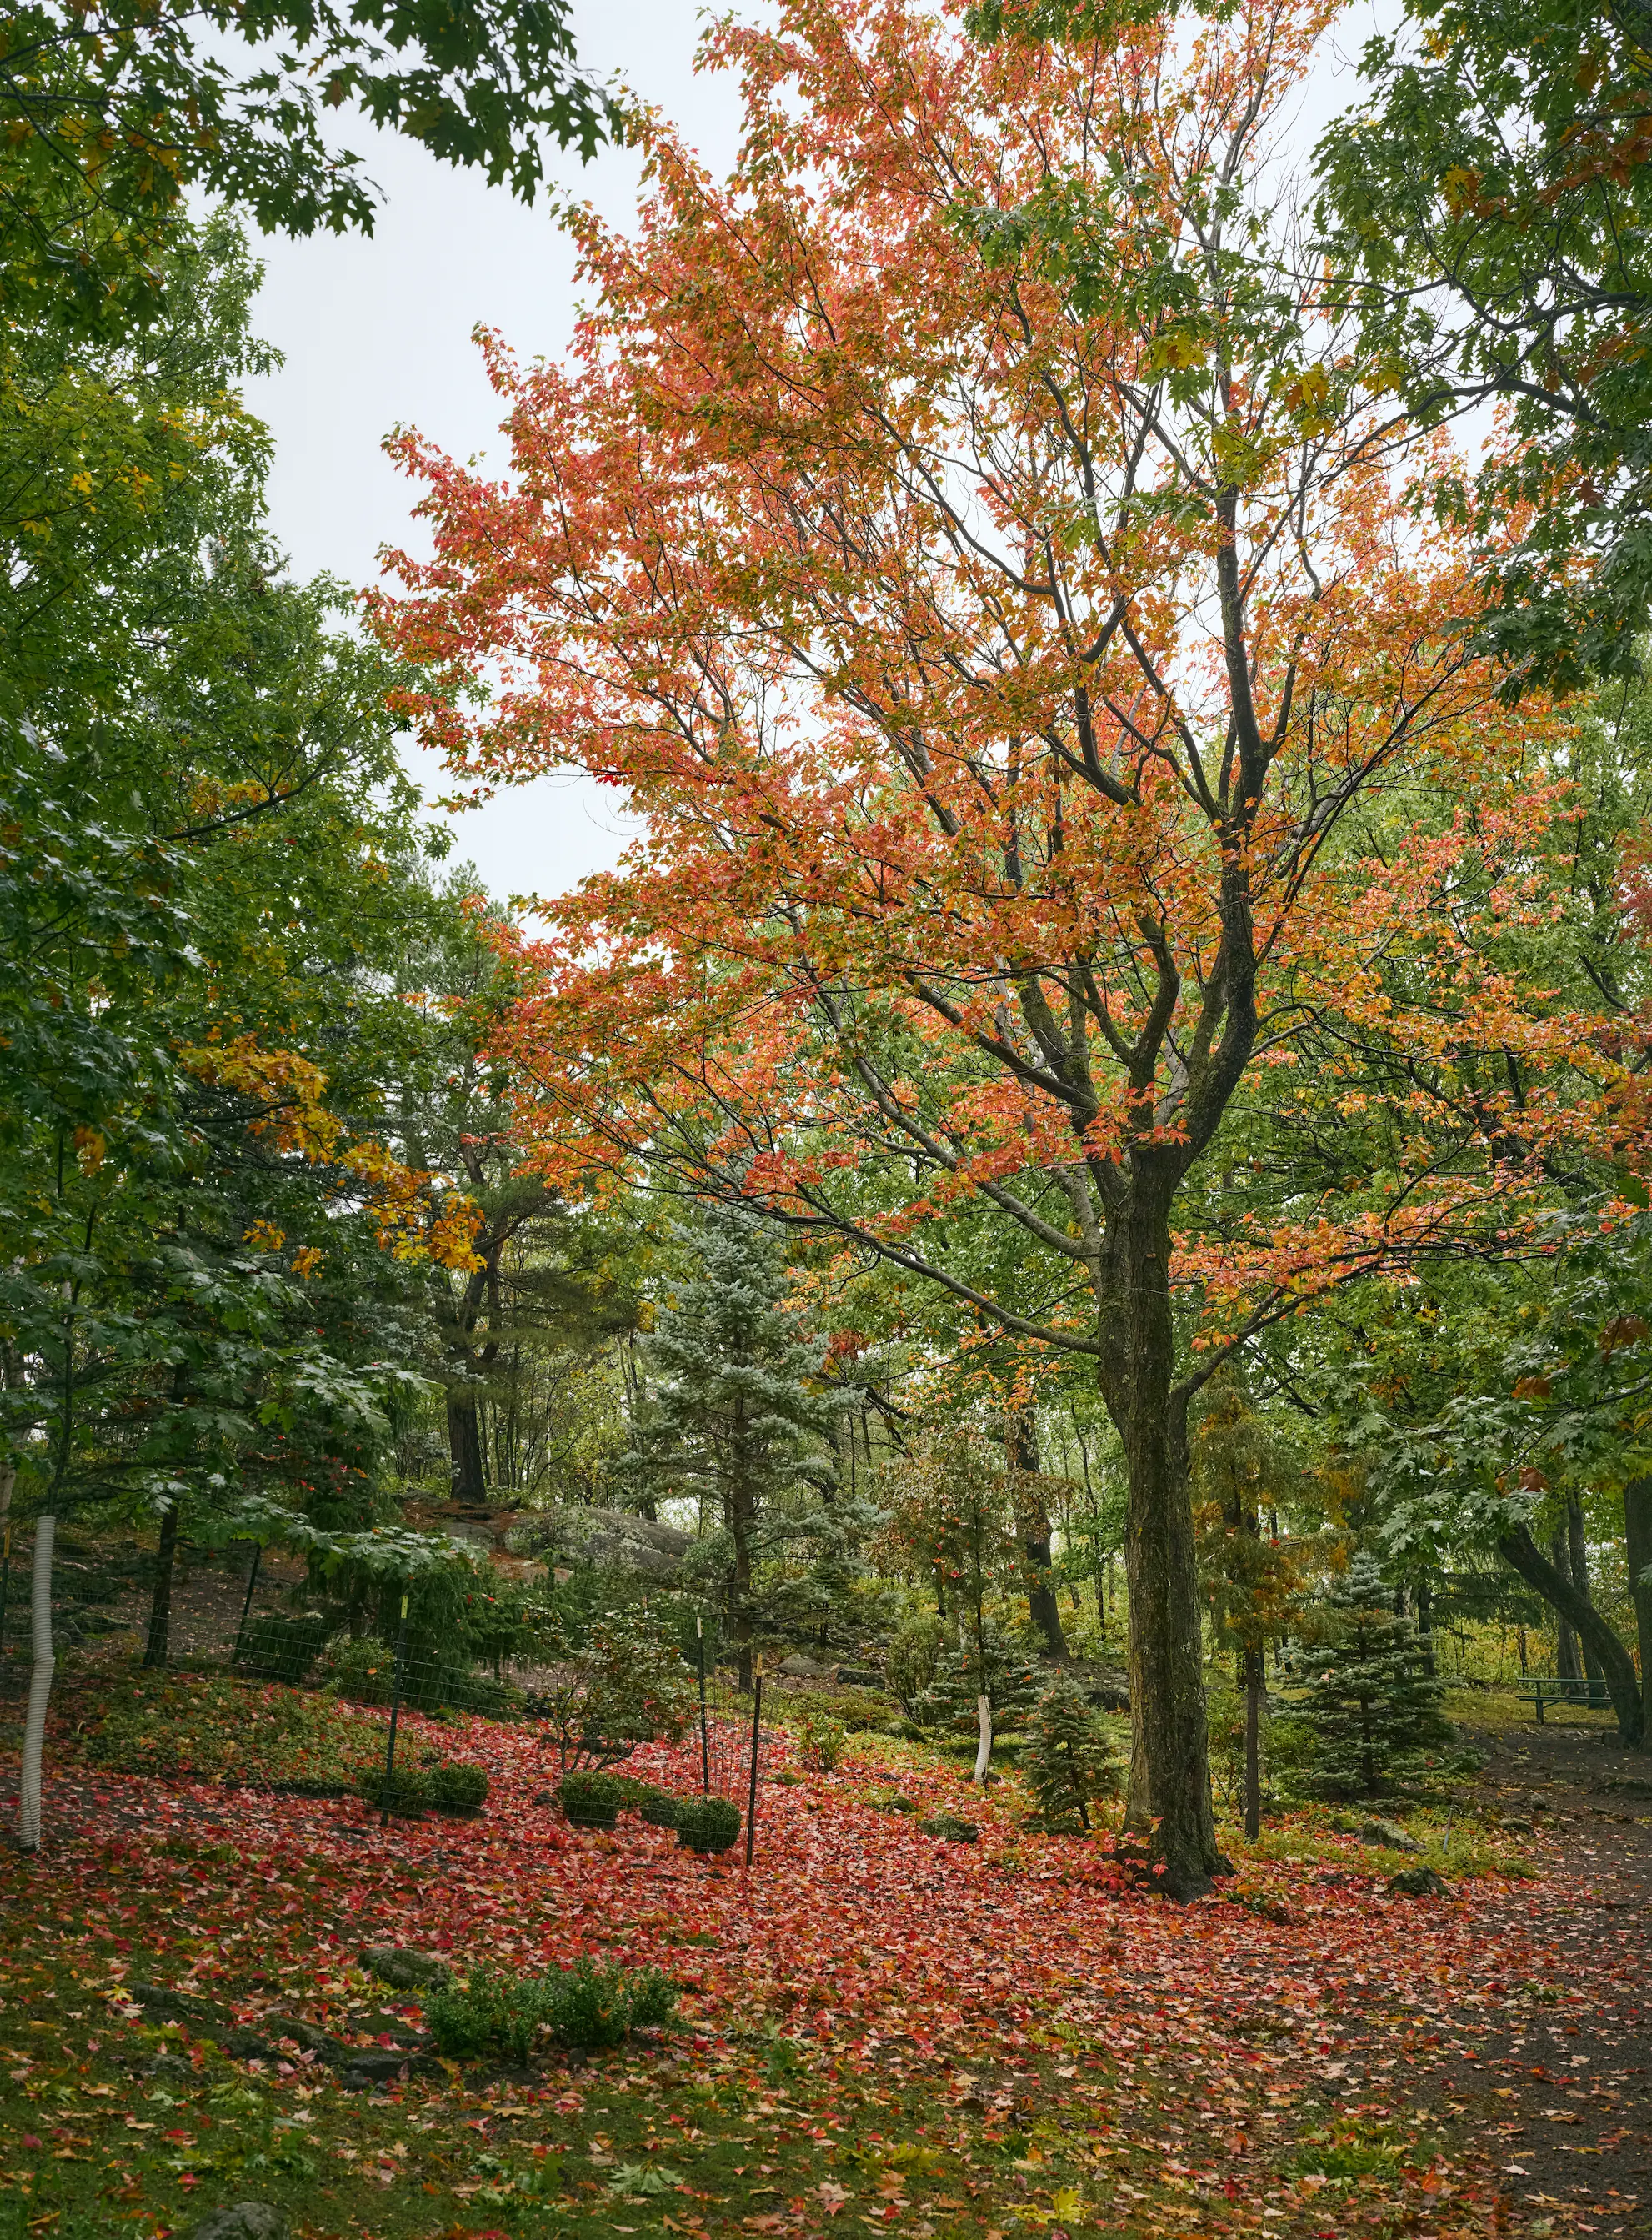 A large, brightly-colored tree with orange leaves stands in the midst of a lush, green forest.